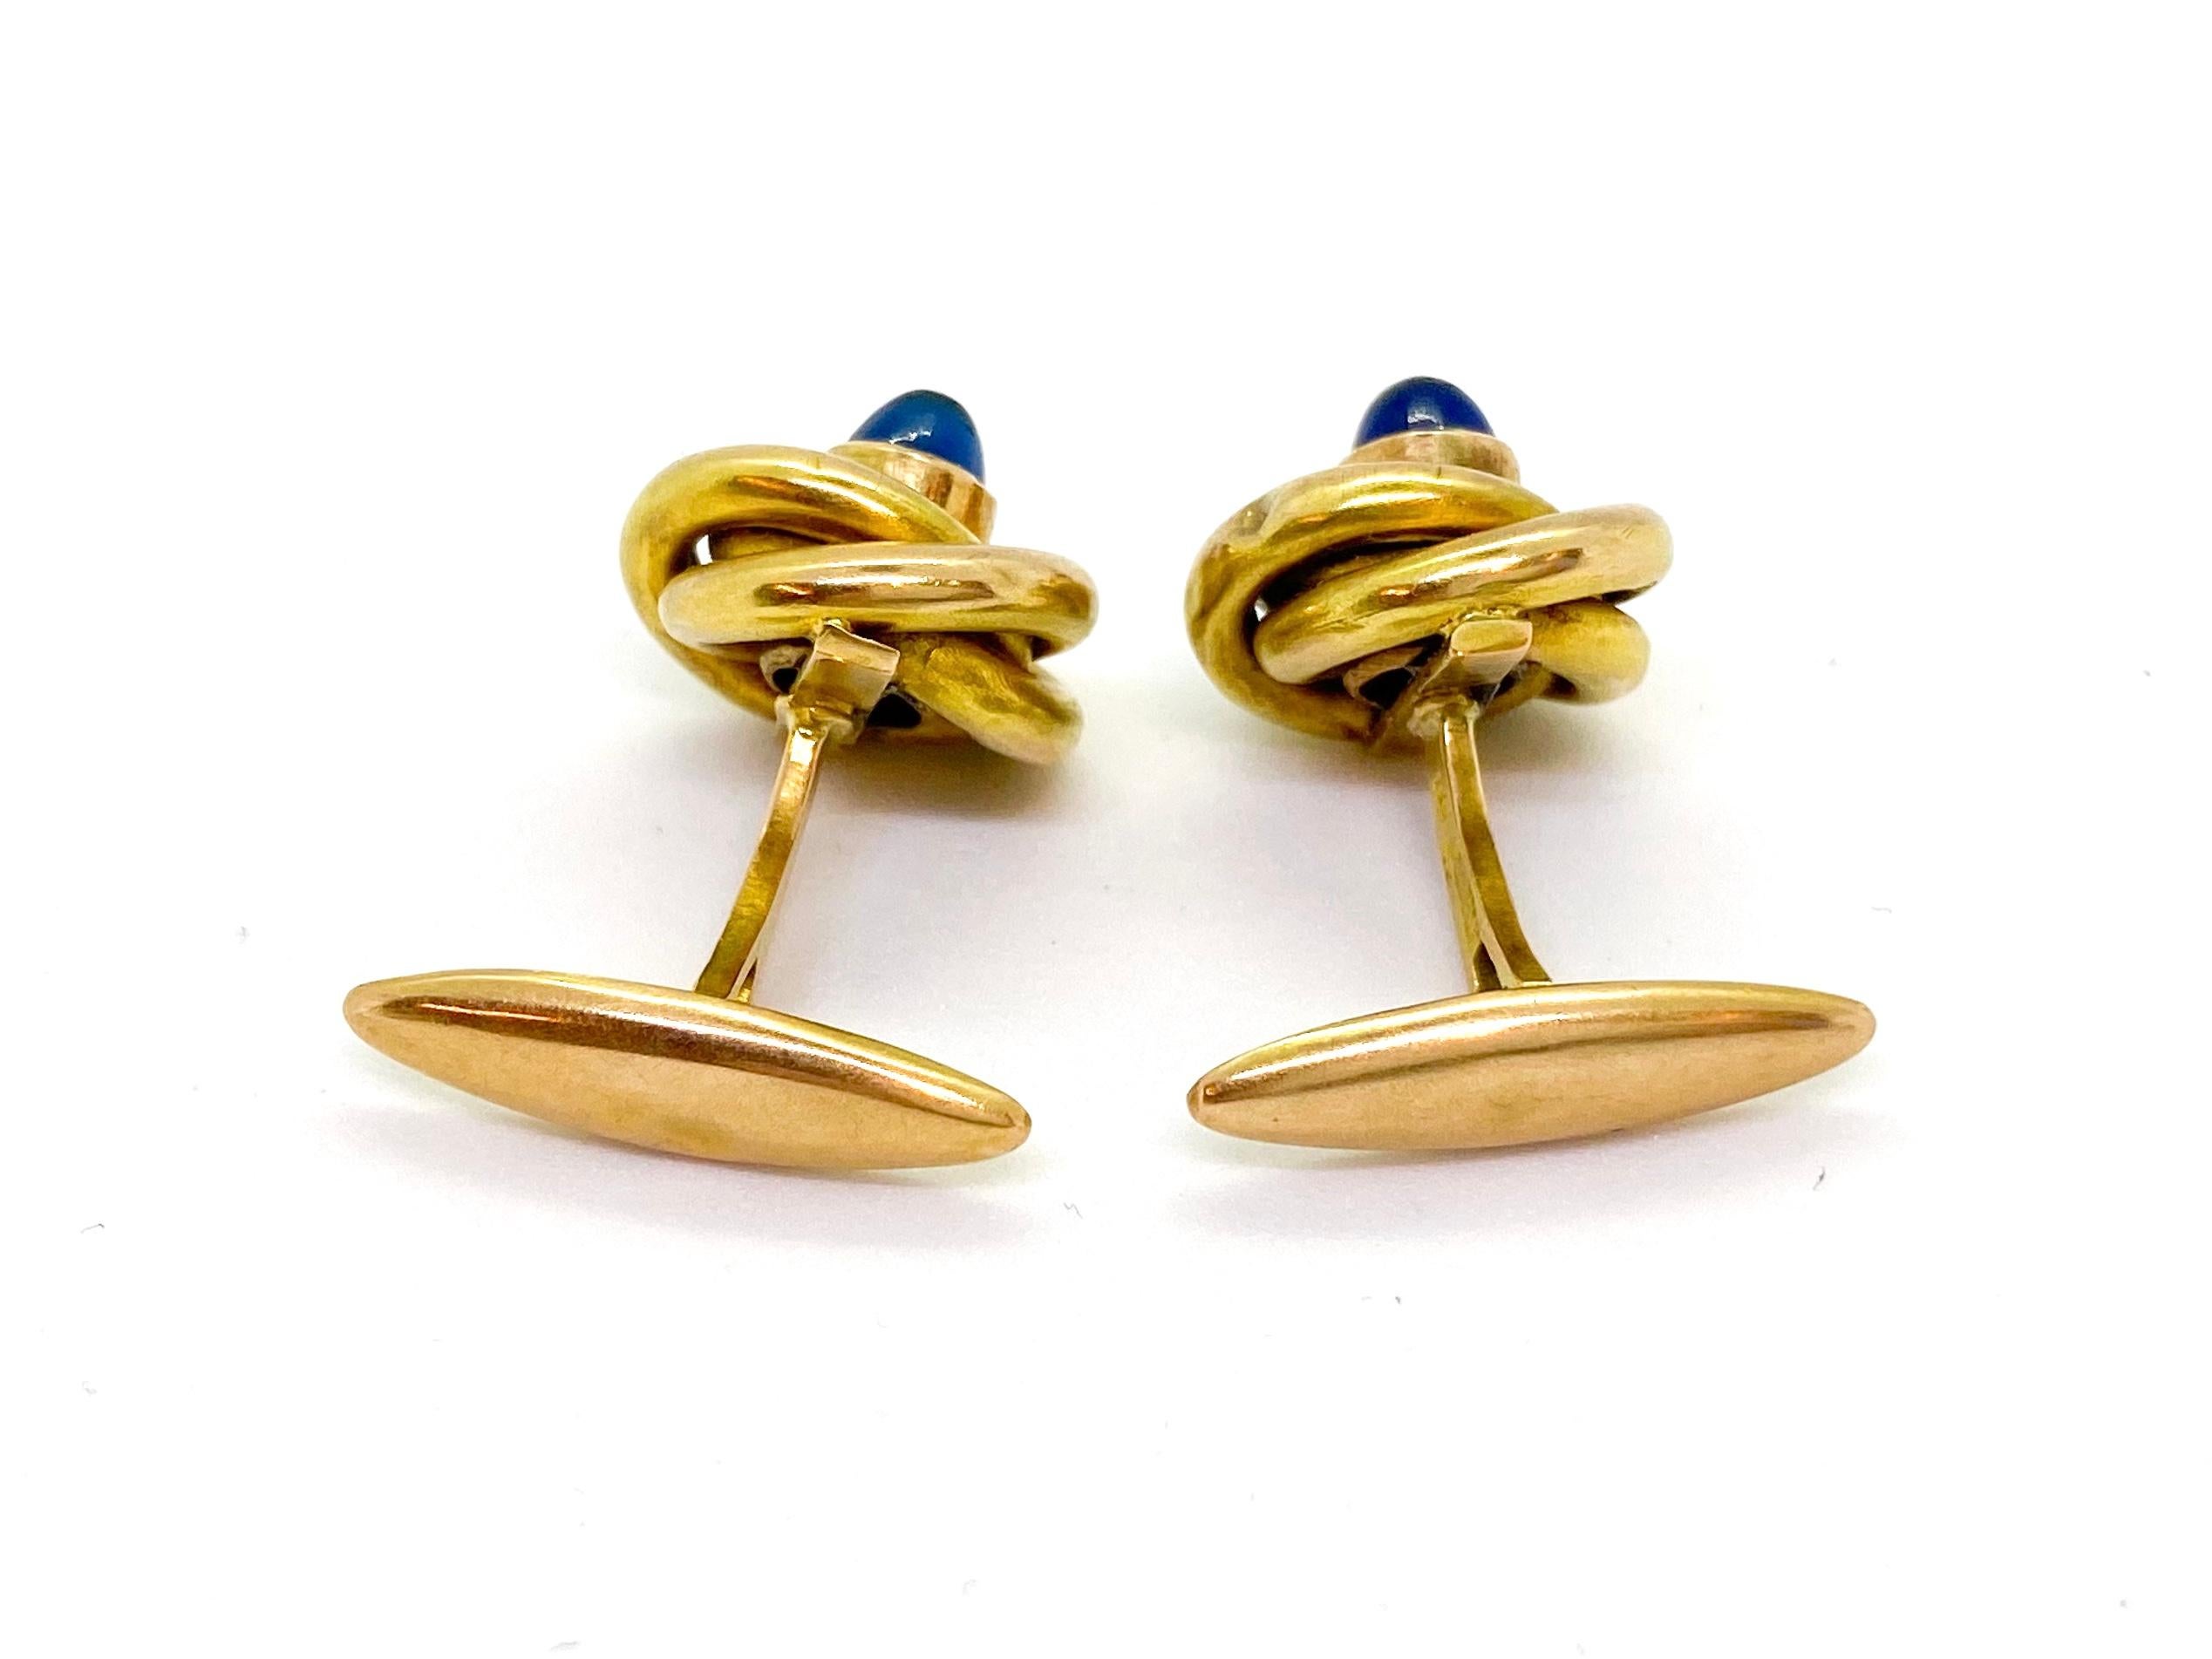 14 Karat Yellow Gold Russia Sapphire Cufflinks
Lenght 2.2 cm, Diameter 1.5 cm
The author's mark apparently rr. I do not recognize.
Gold Mark 56 Russia.
The normal price for these would be around 3000e, but once there are dents the price is now